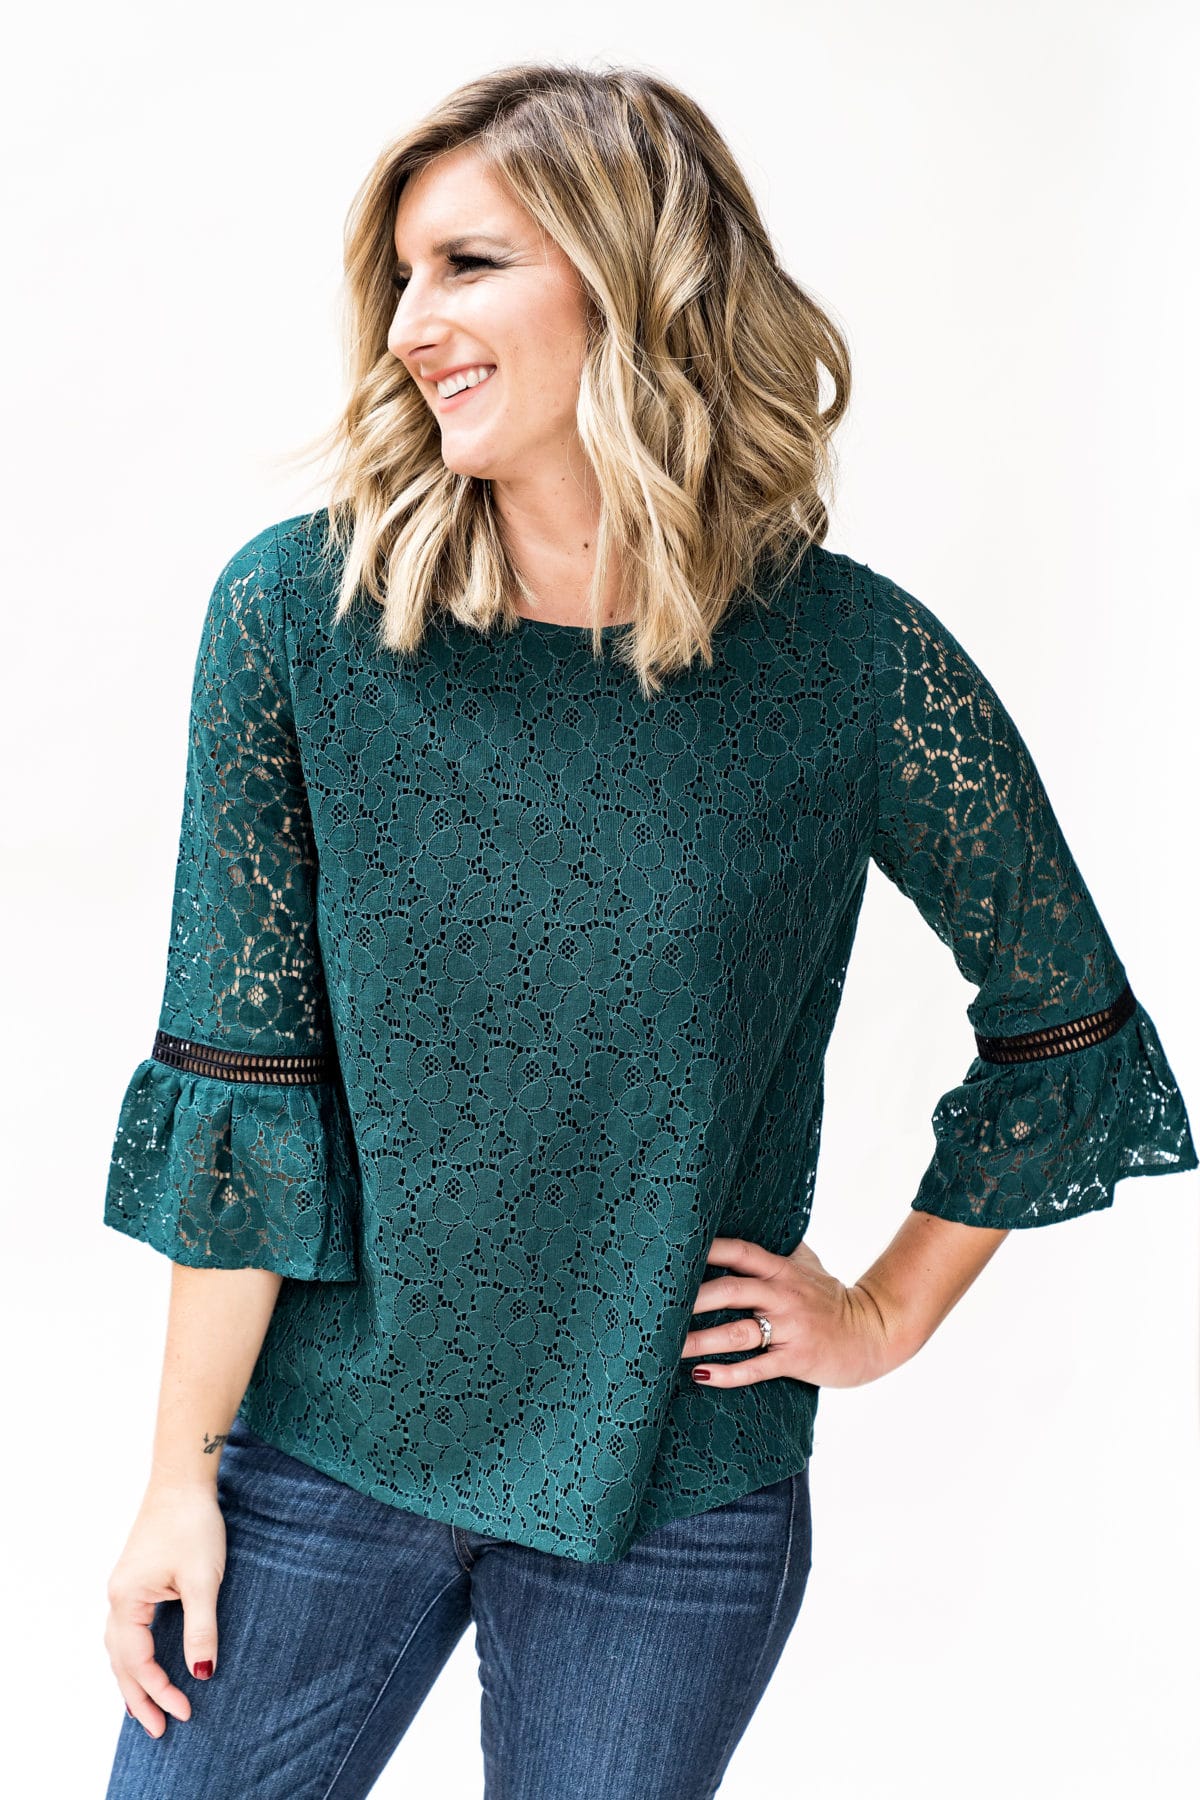 Gibson x Glam lace bell sleeve top